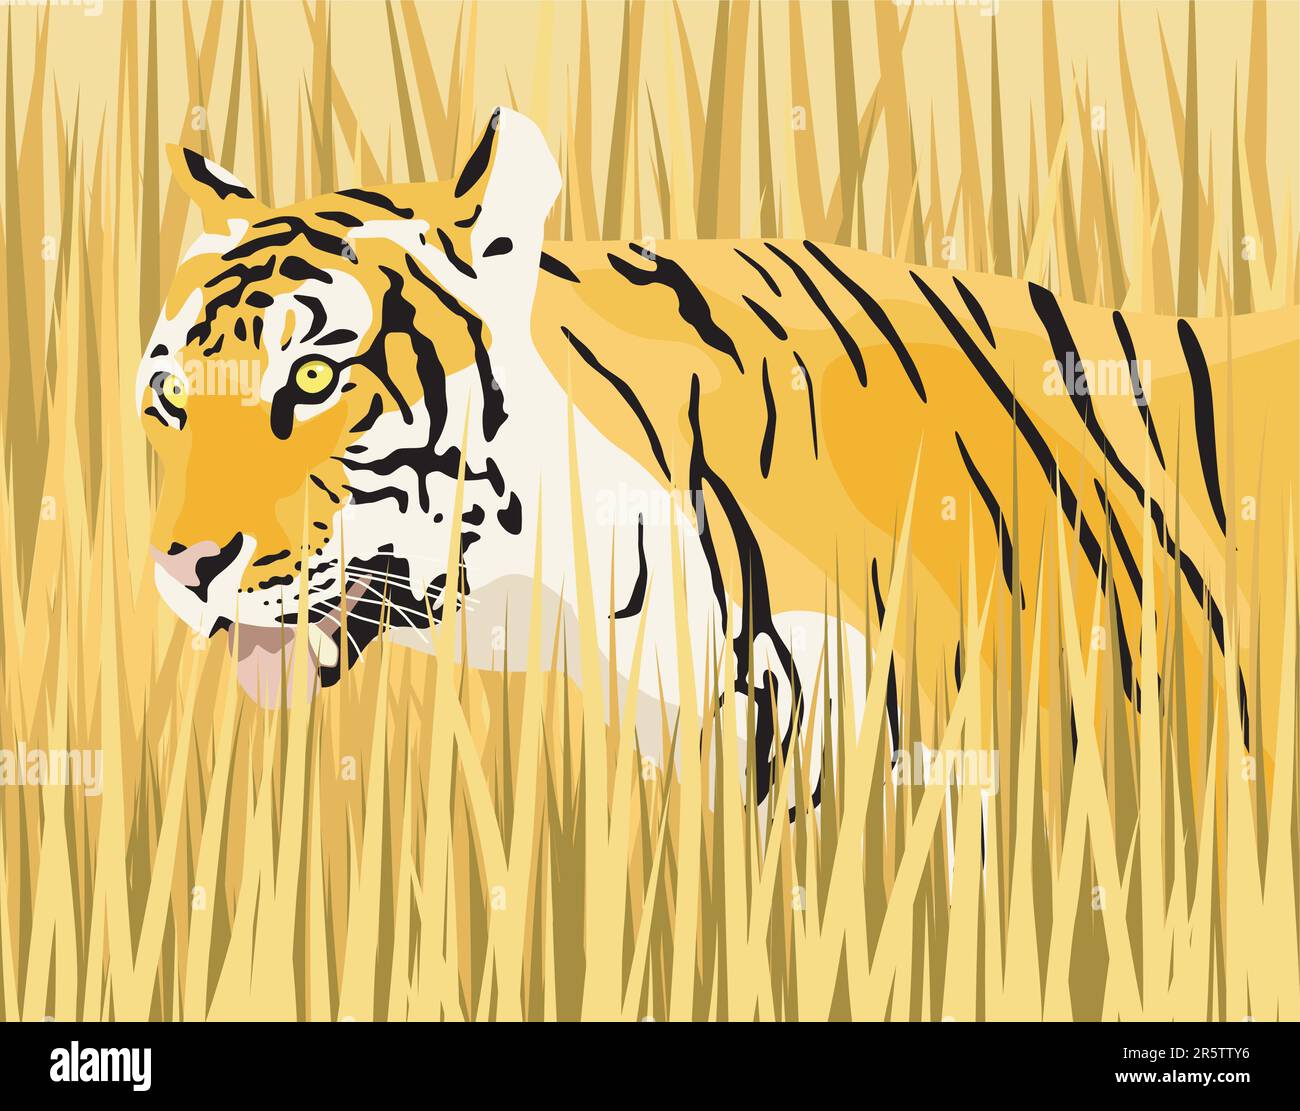 Vector illustration of a tiger in dry grass with tiger and grass as separate elements Stock Vector